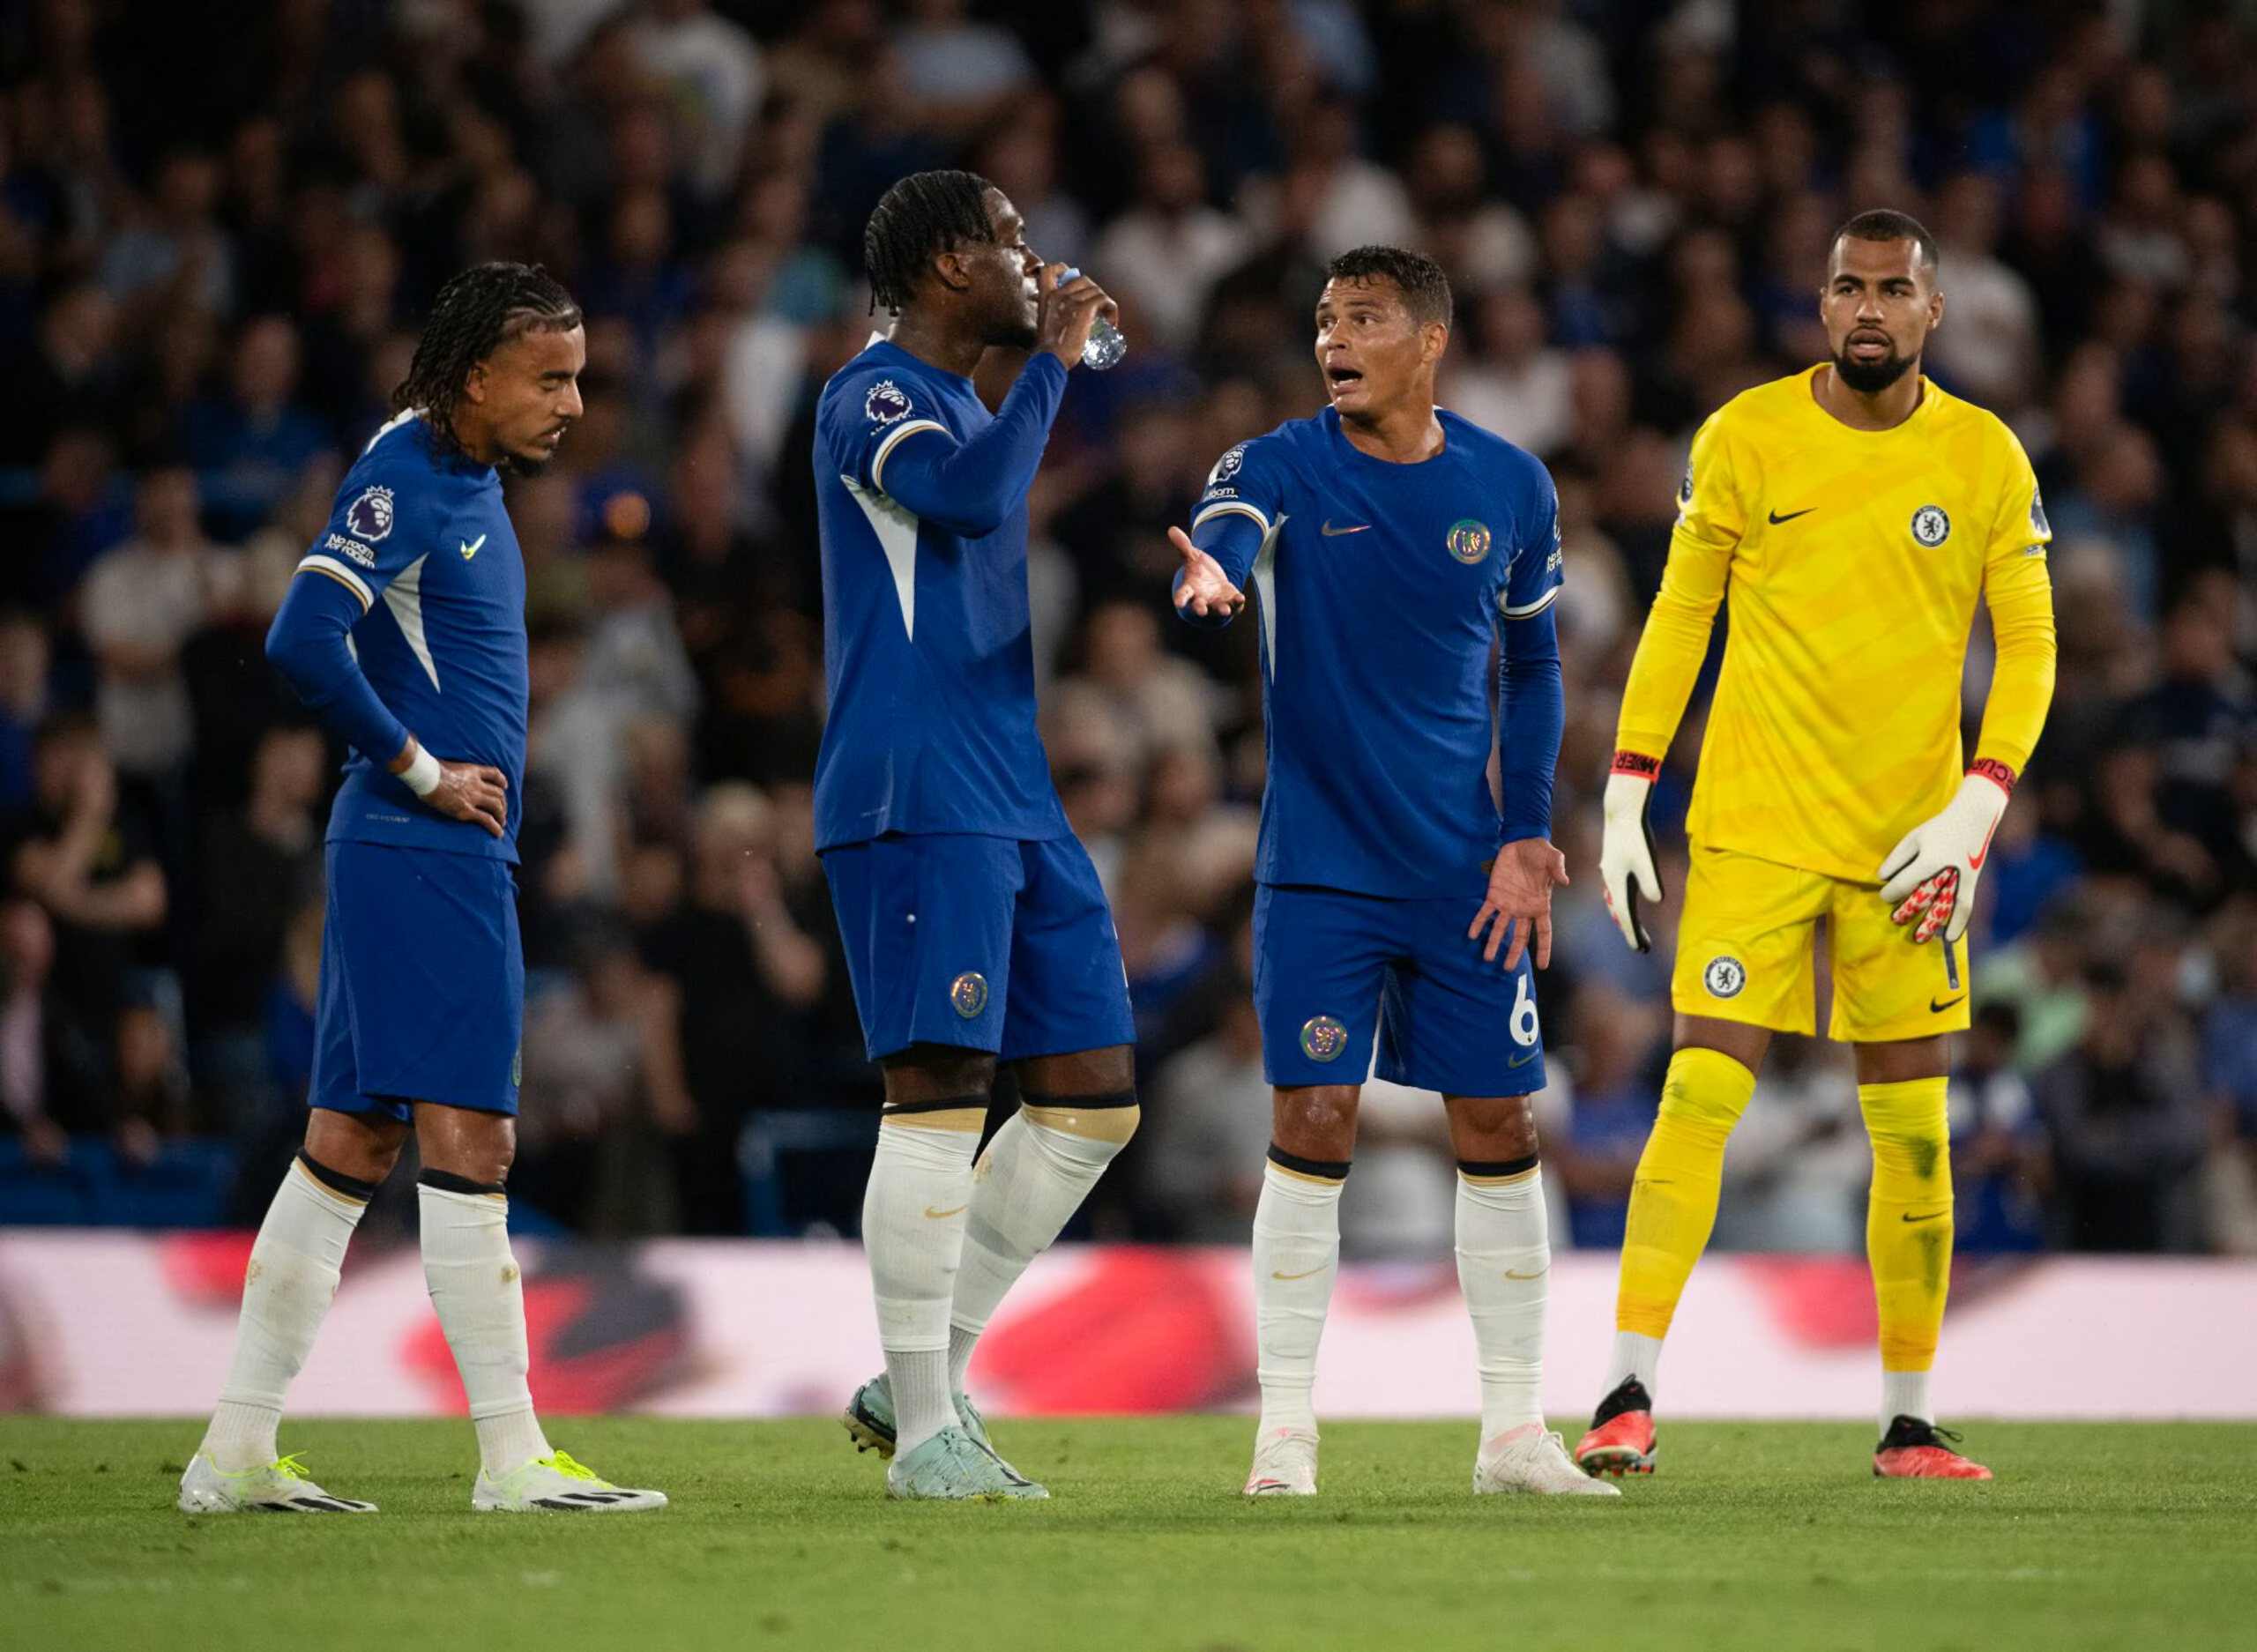 Fulham vs Chelsea 3 things to look out for in Premier League clash